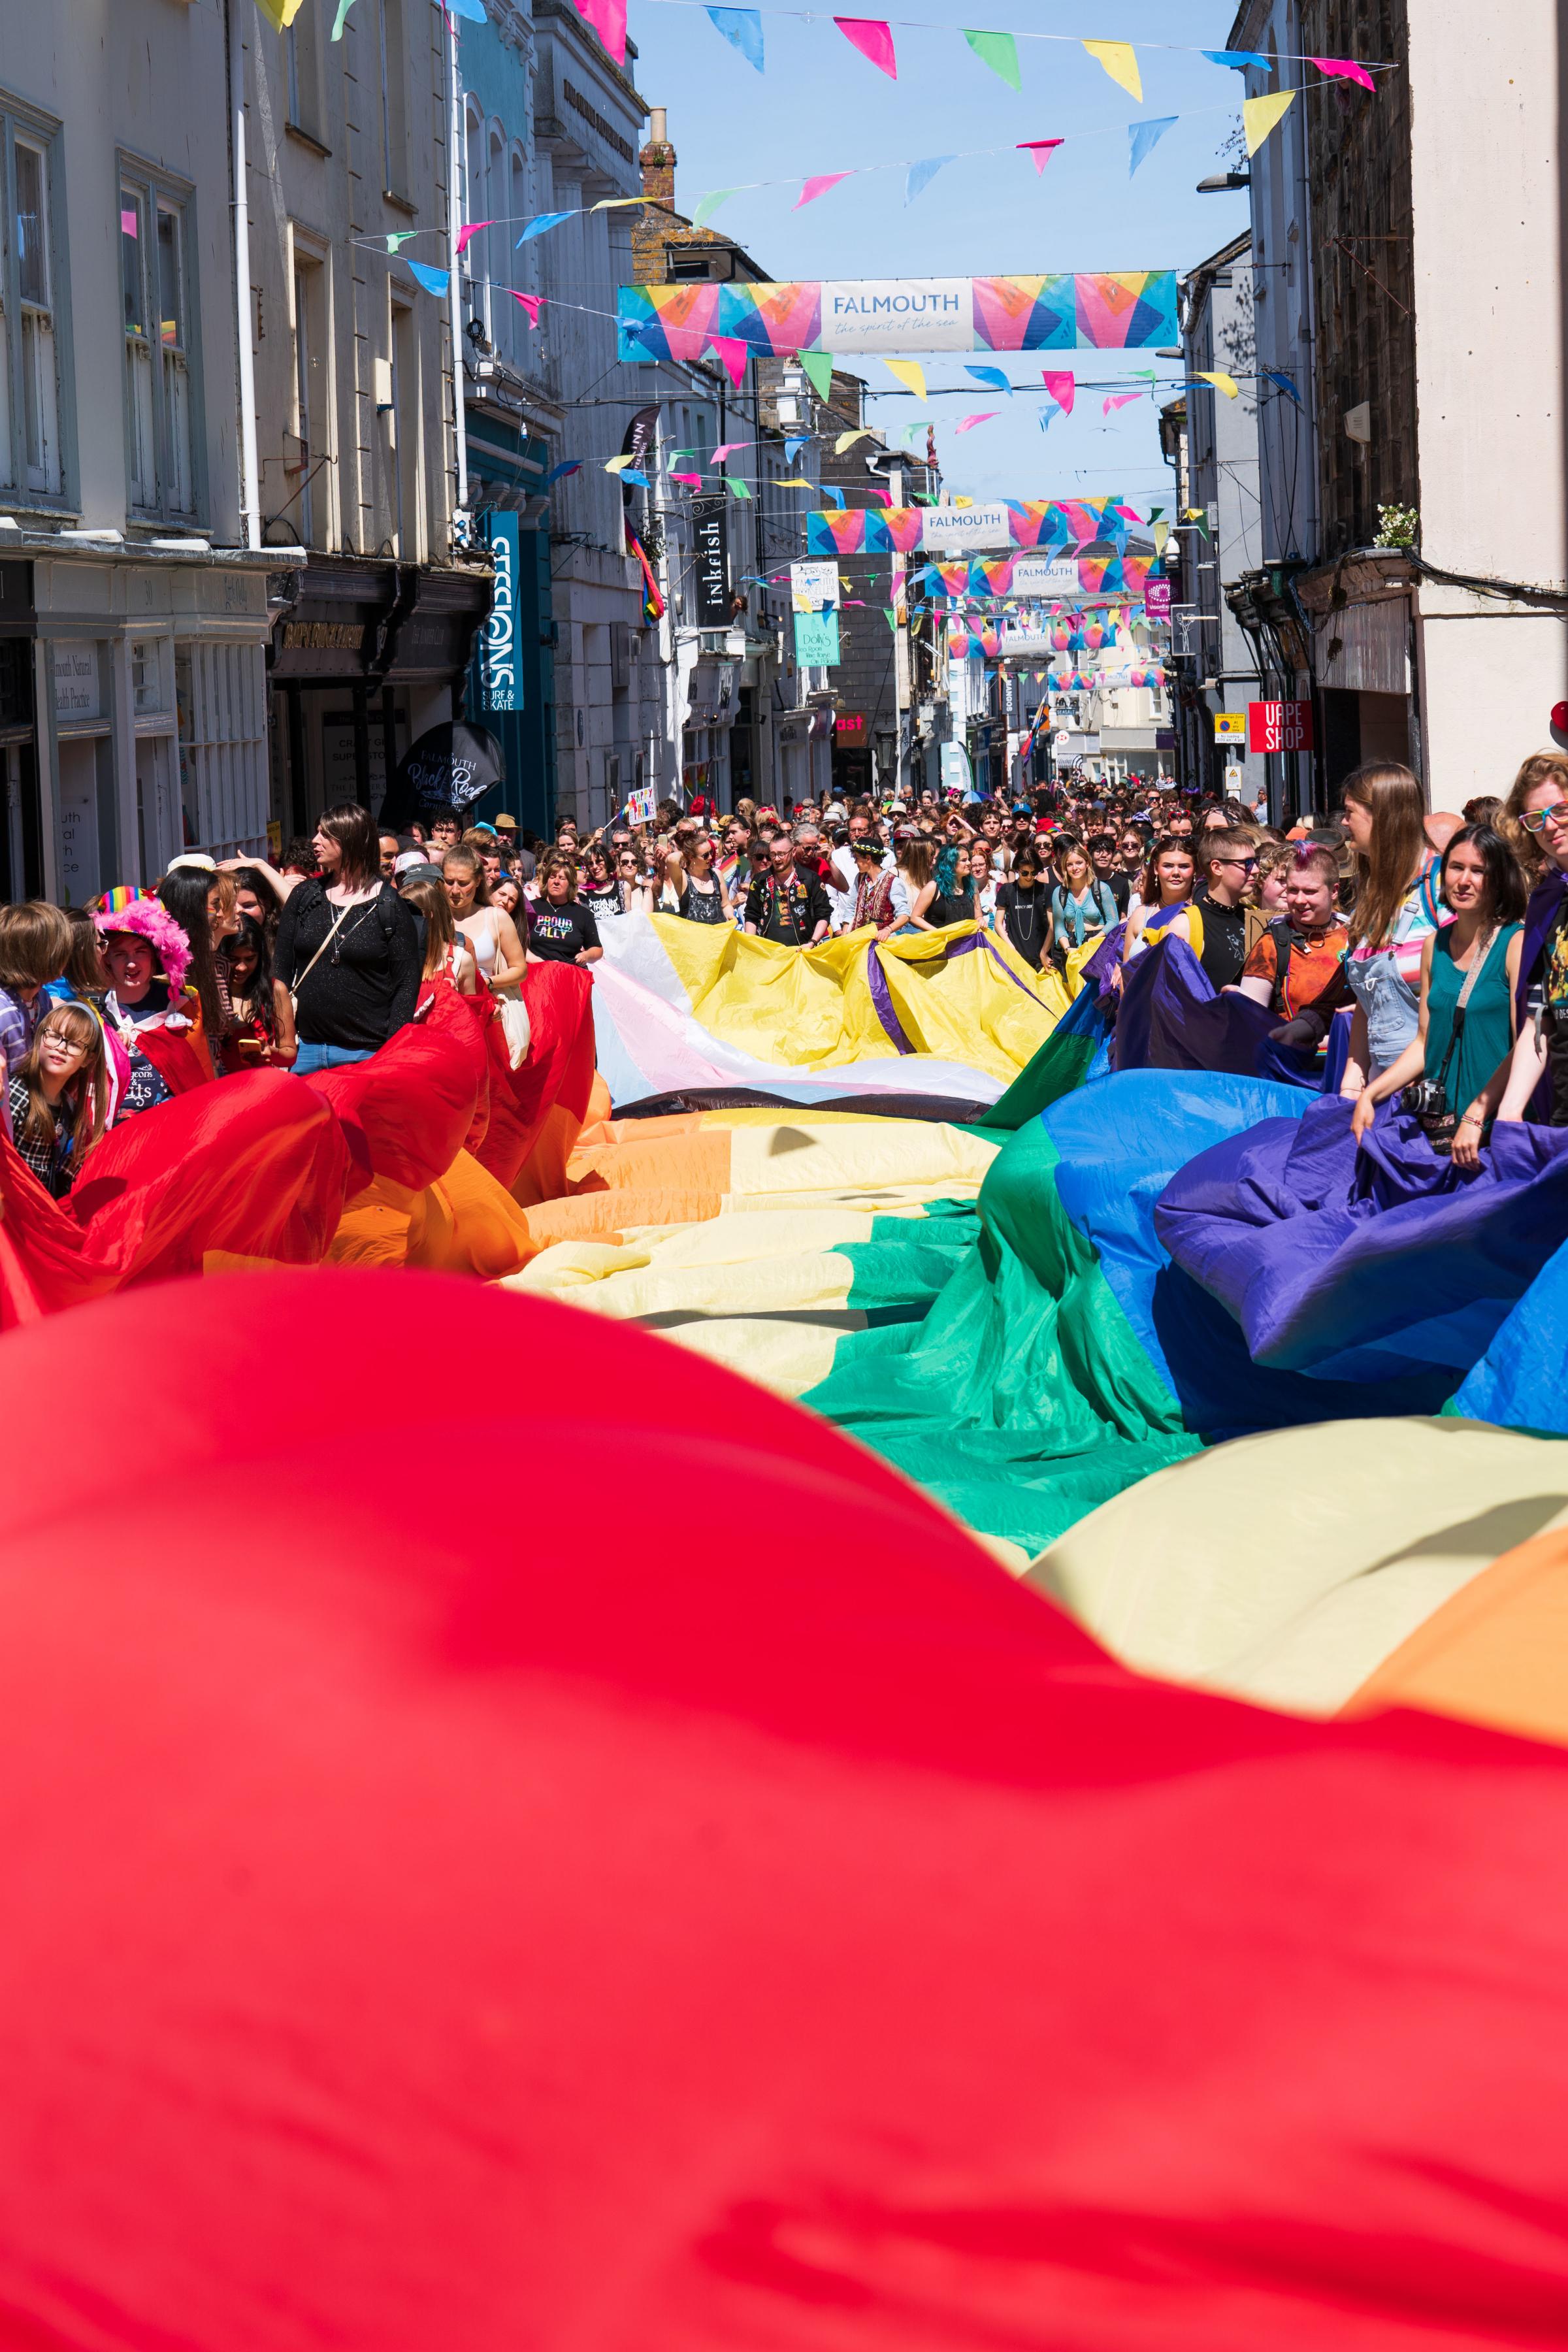 The first Pride march of the month, kicking off in Falmouth with the worlds largest Pride march flag. The march started at the Prince of Wales Pier, went through the centre of town and ended at Events Square. Picture Ollietphotography